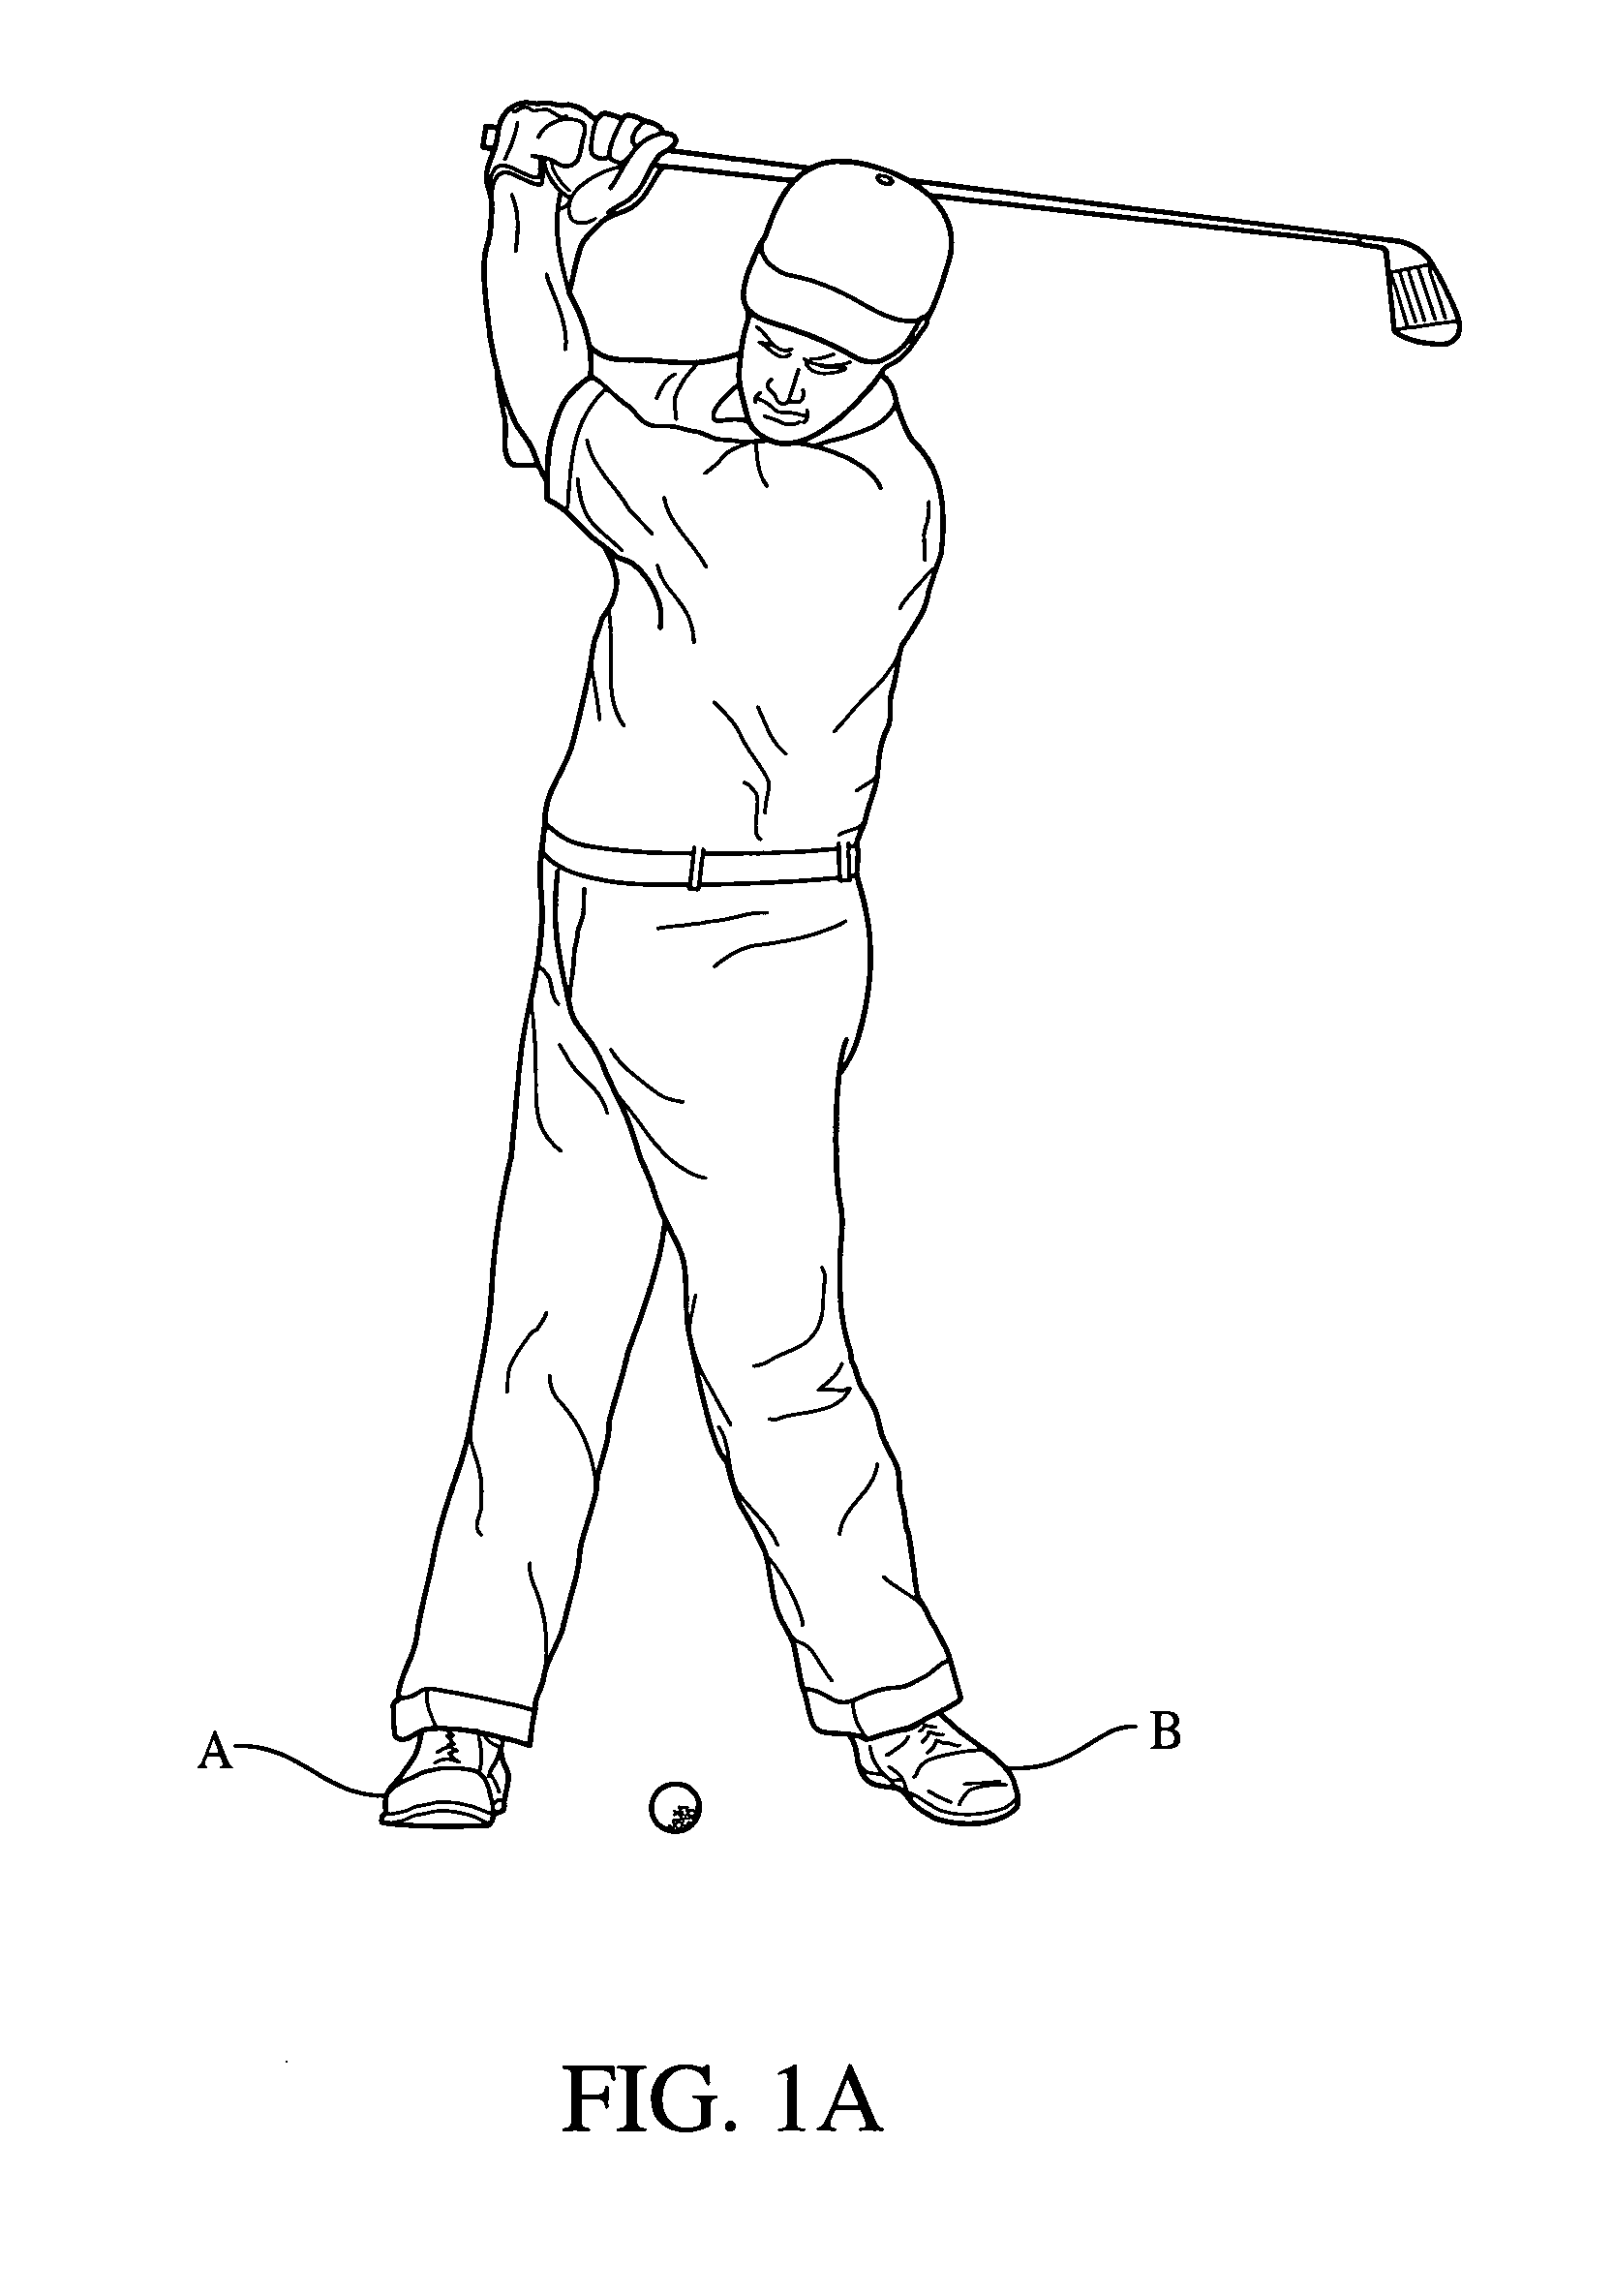 Apparatus and method for controlling and stabilizing the swing mechanics of a golfer